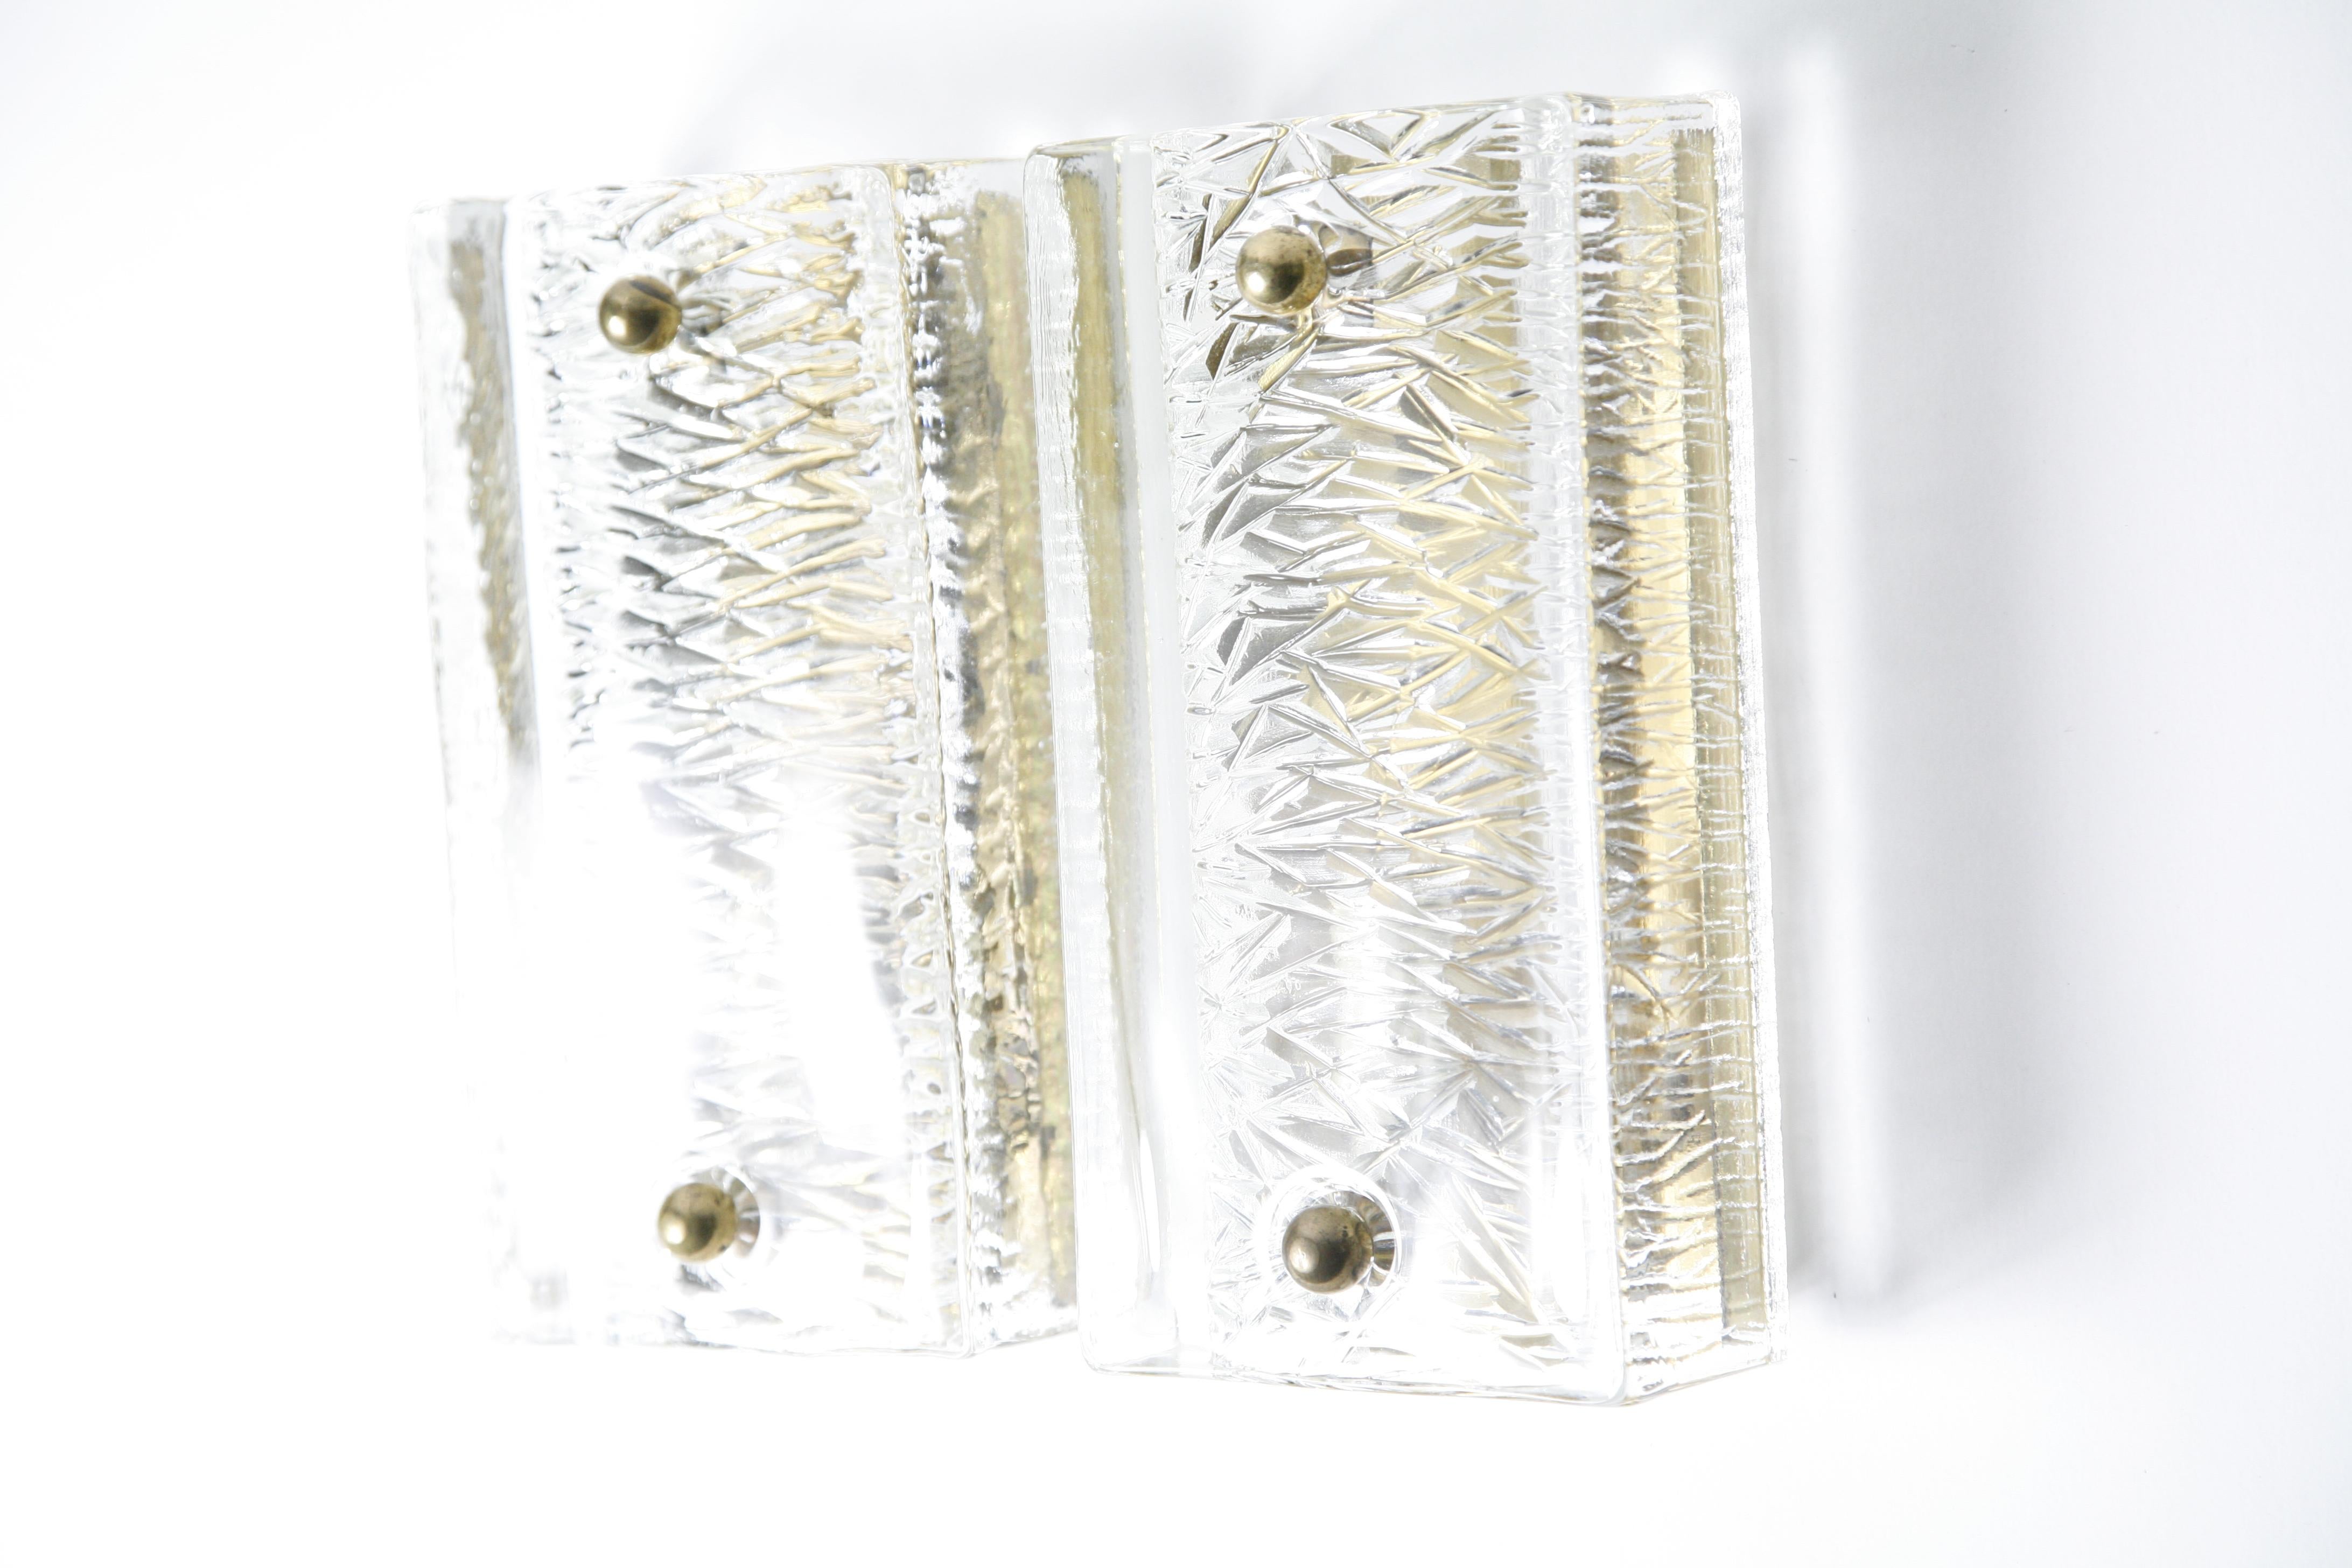 Mid-Century Modern Pair of Orrefors Sconces Brass and Crystal Glass Shades by Orrefors Sweden, 1970